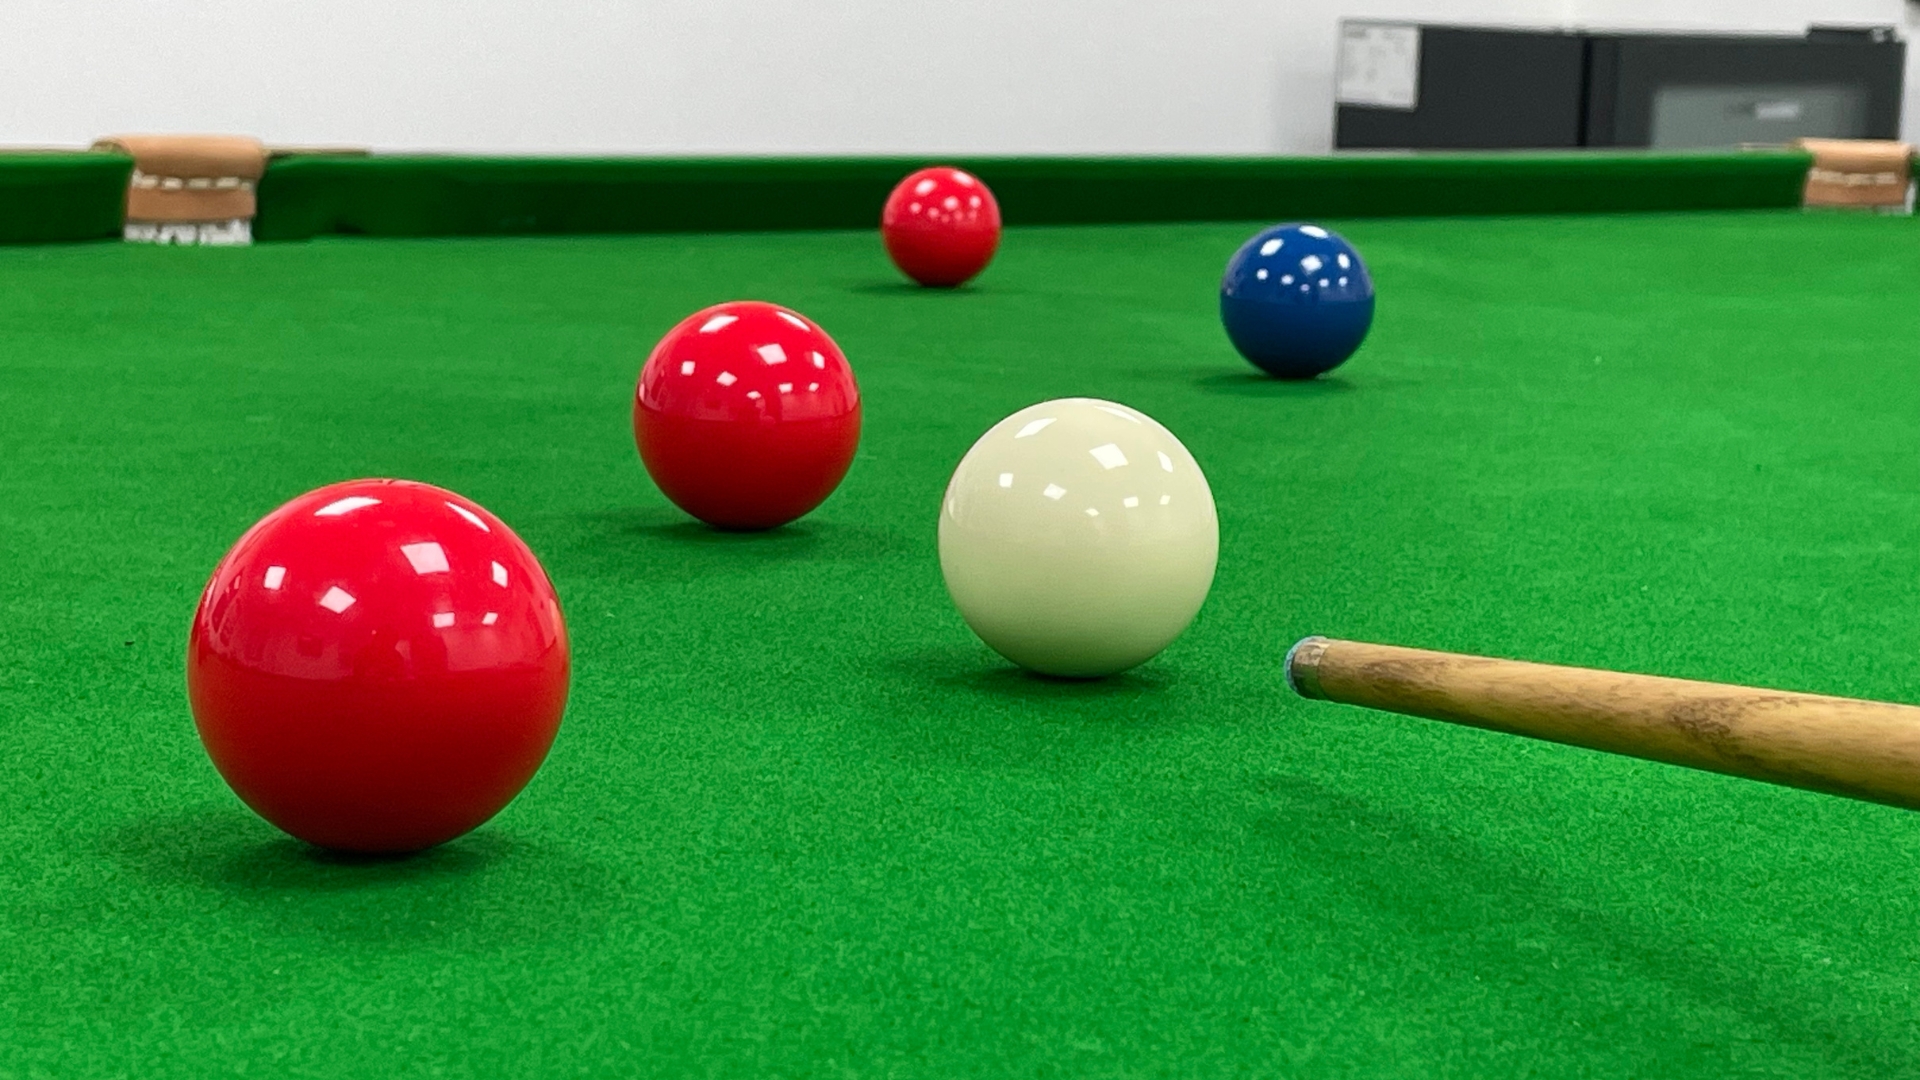 Snooker Practice: What is the T-angle?